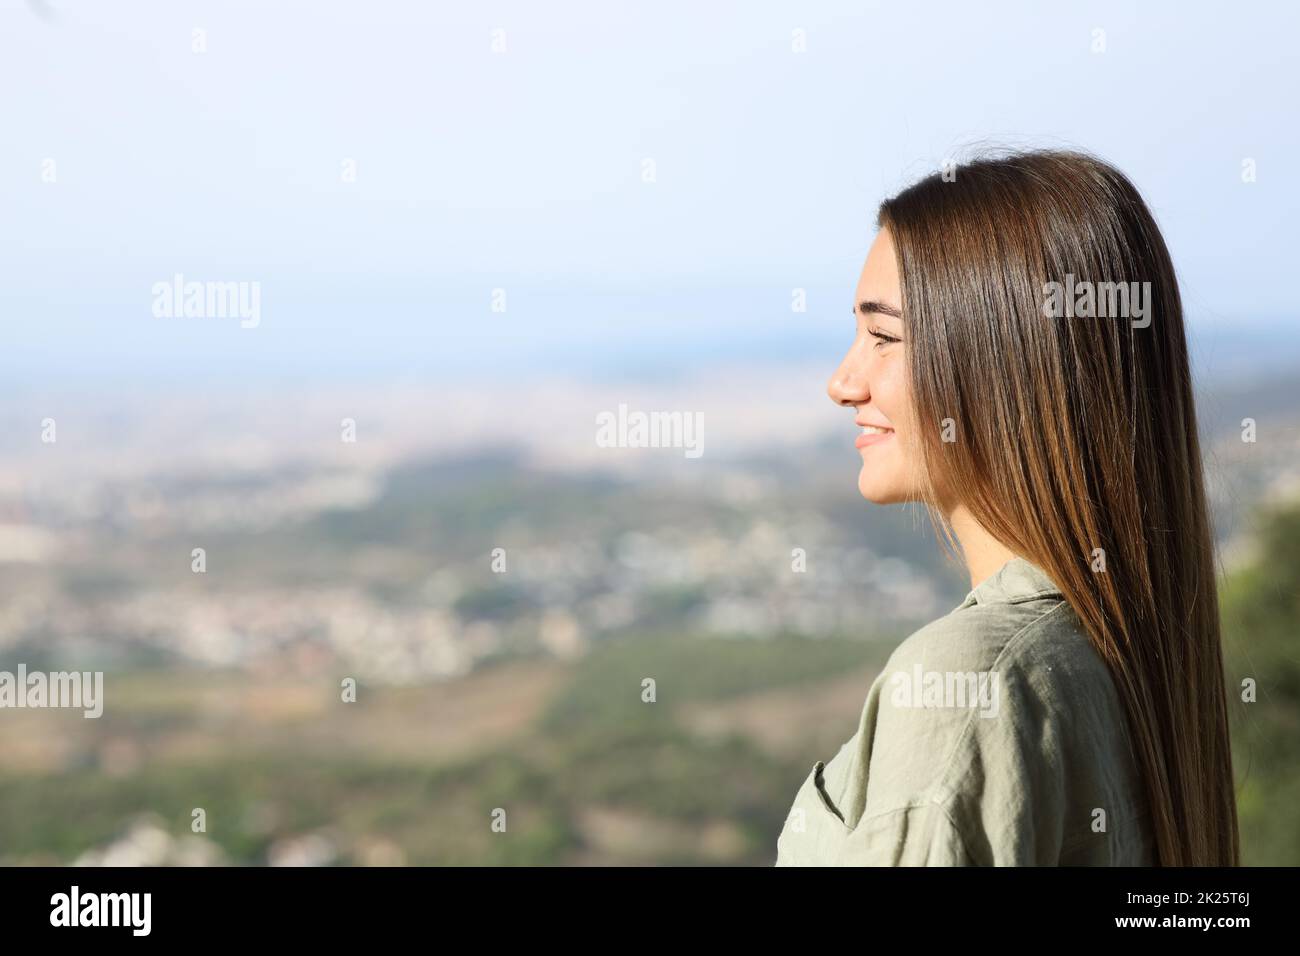 Happy teen contemplating views outdoors Stock Photo